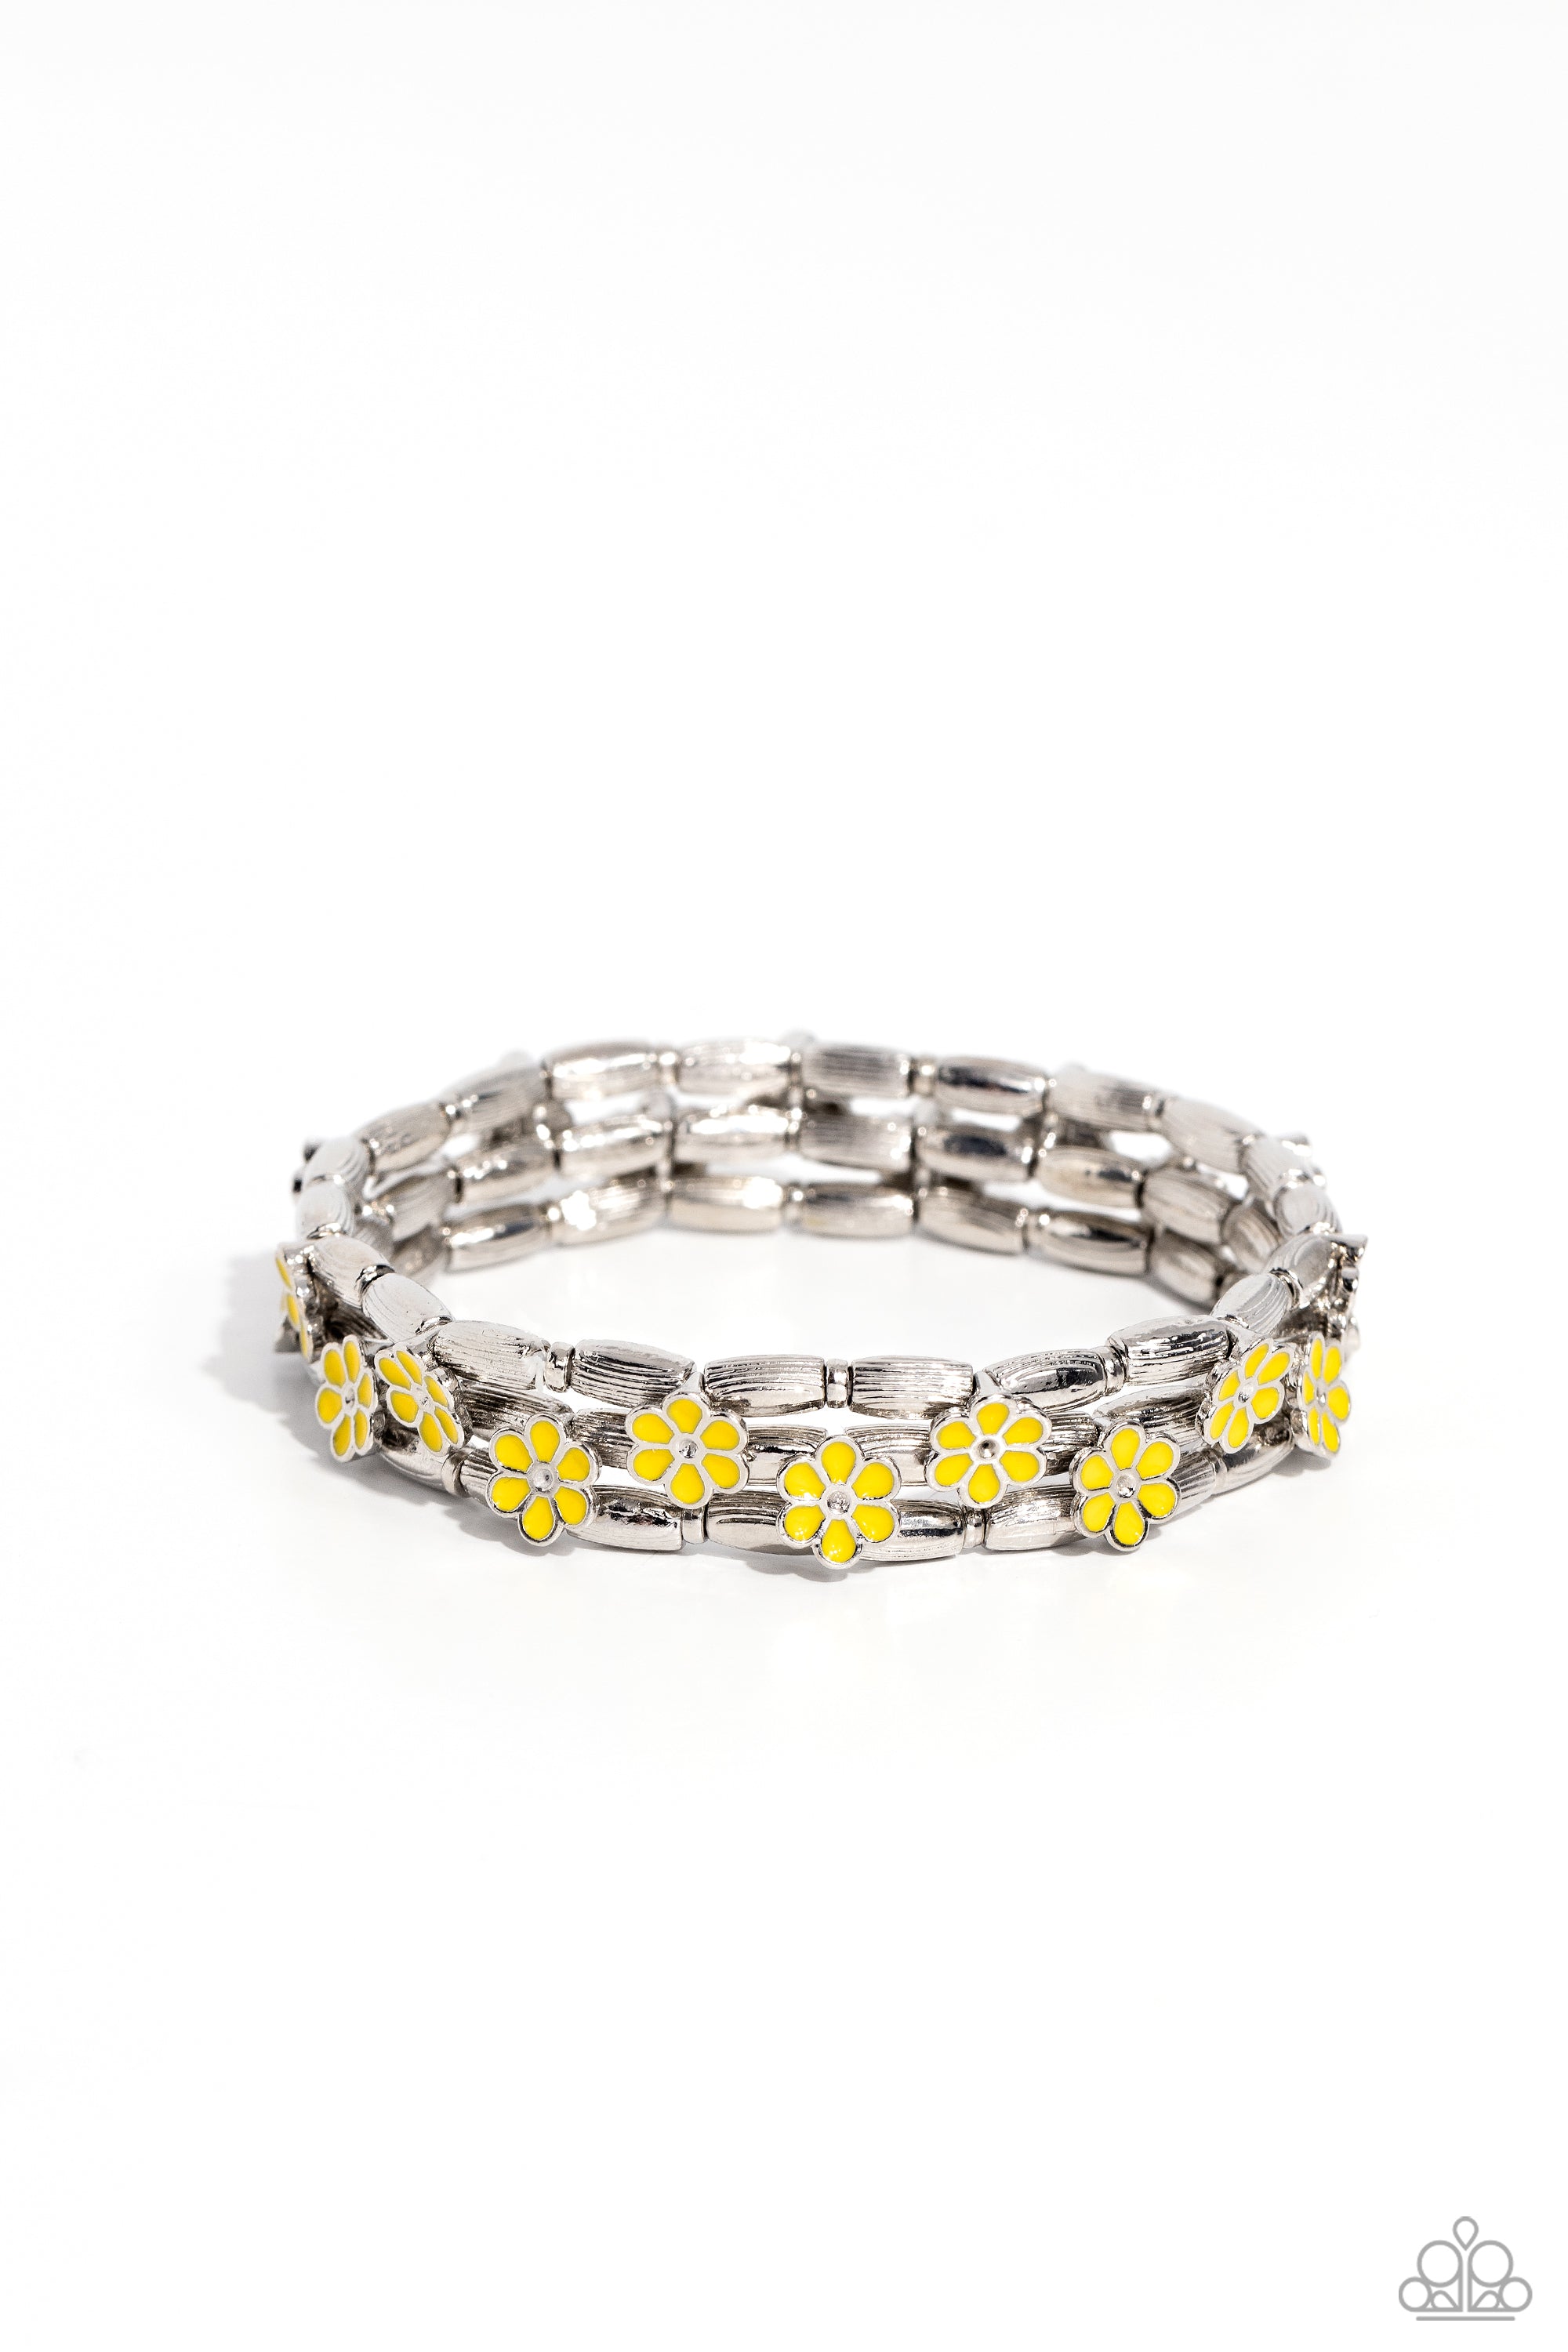 Scattered Springtime Yellow Flower Bracelet - Paparazzi Accessories- lightbox - CarasShop.com - $5 Jewelry by Cara Jewels